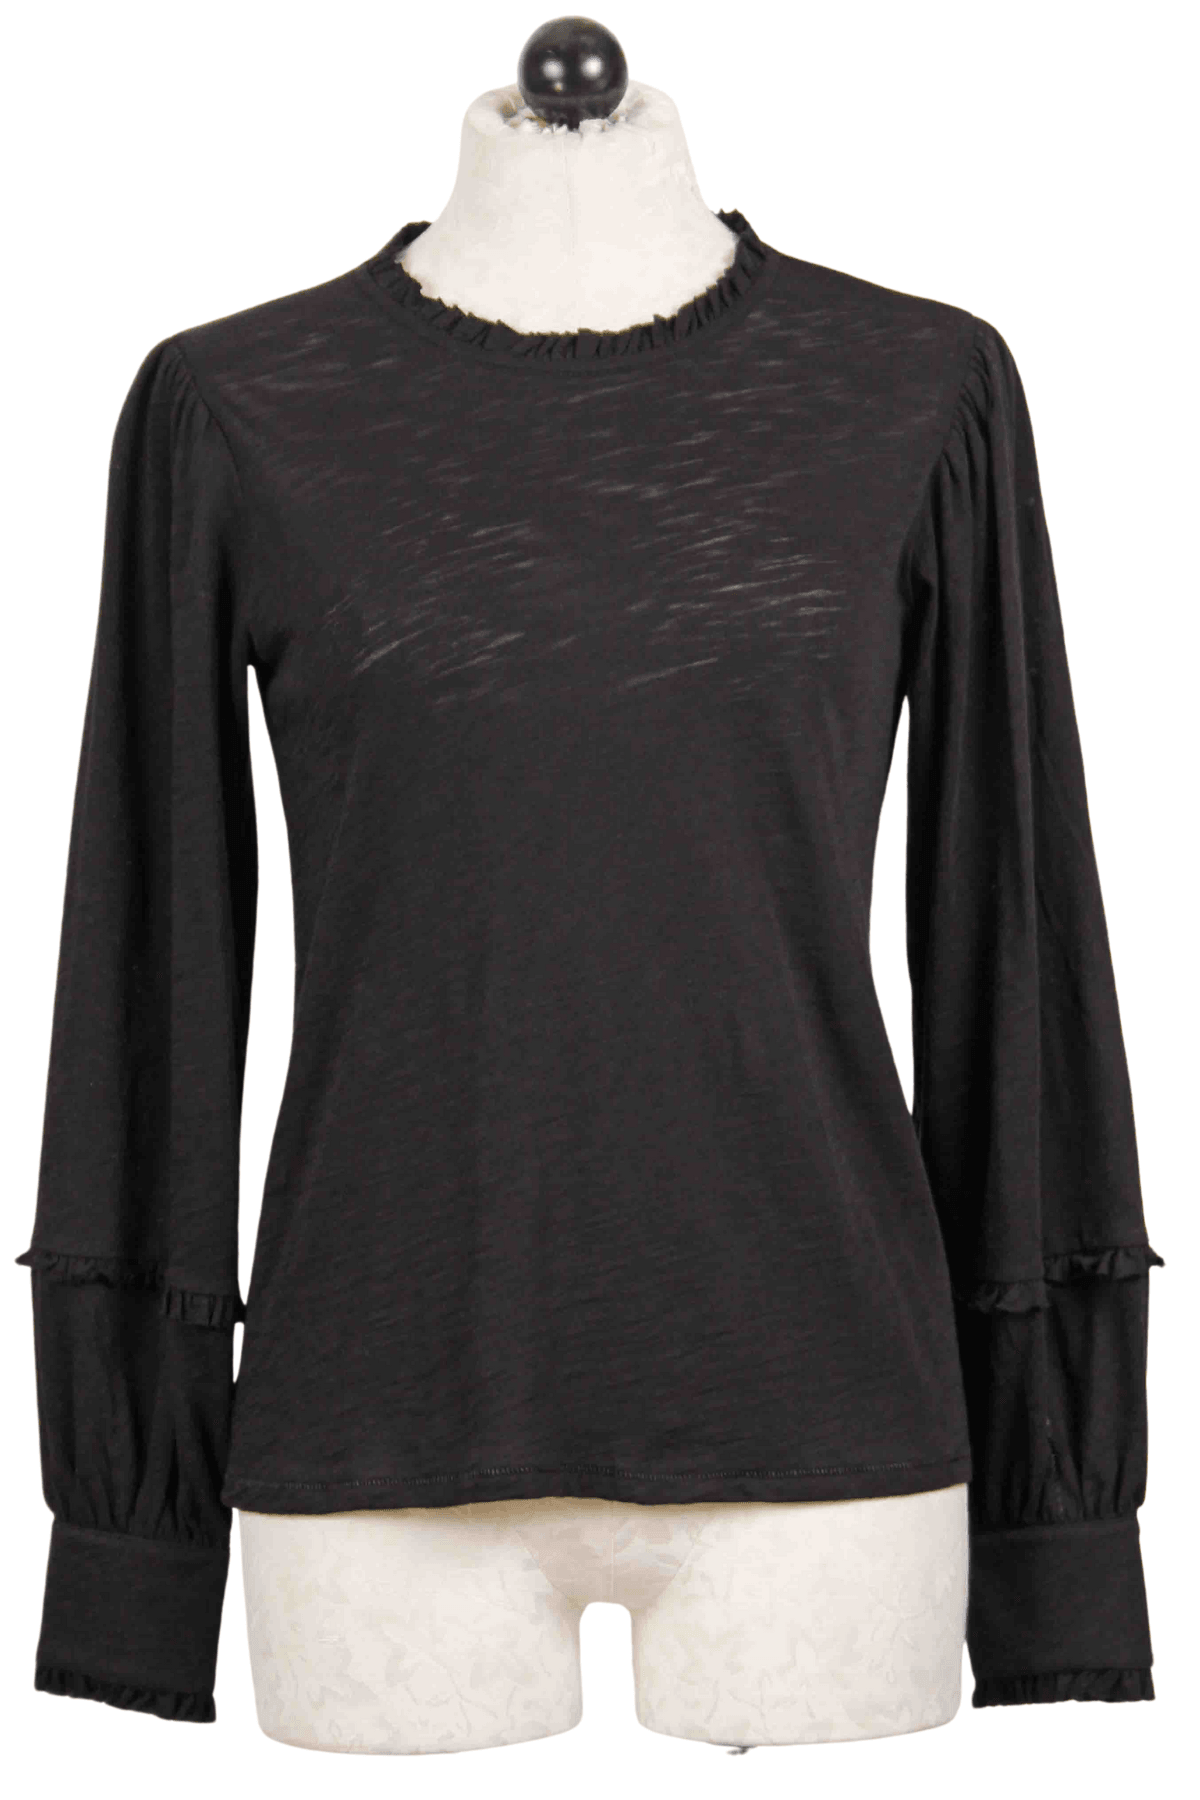 black Long Sleeve Ruffle Crew Neck Tee by Goldie Tees with a Double Later Cuff